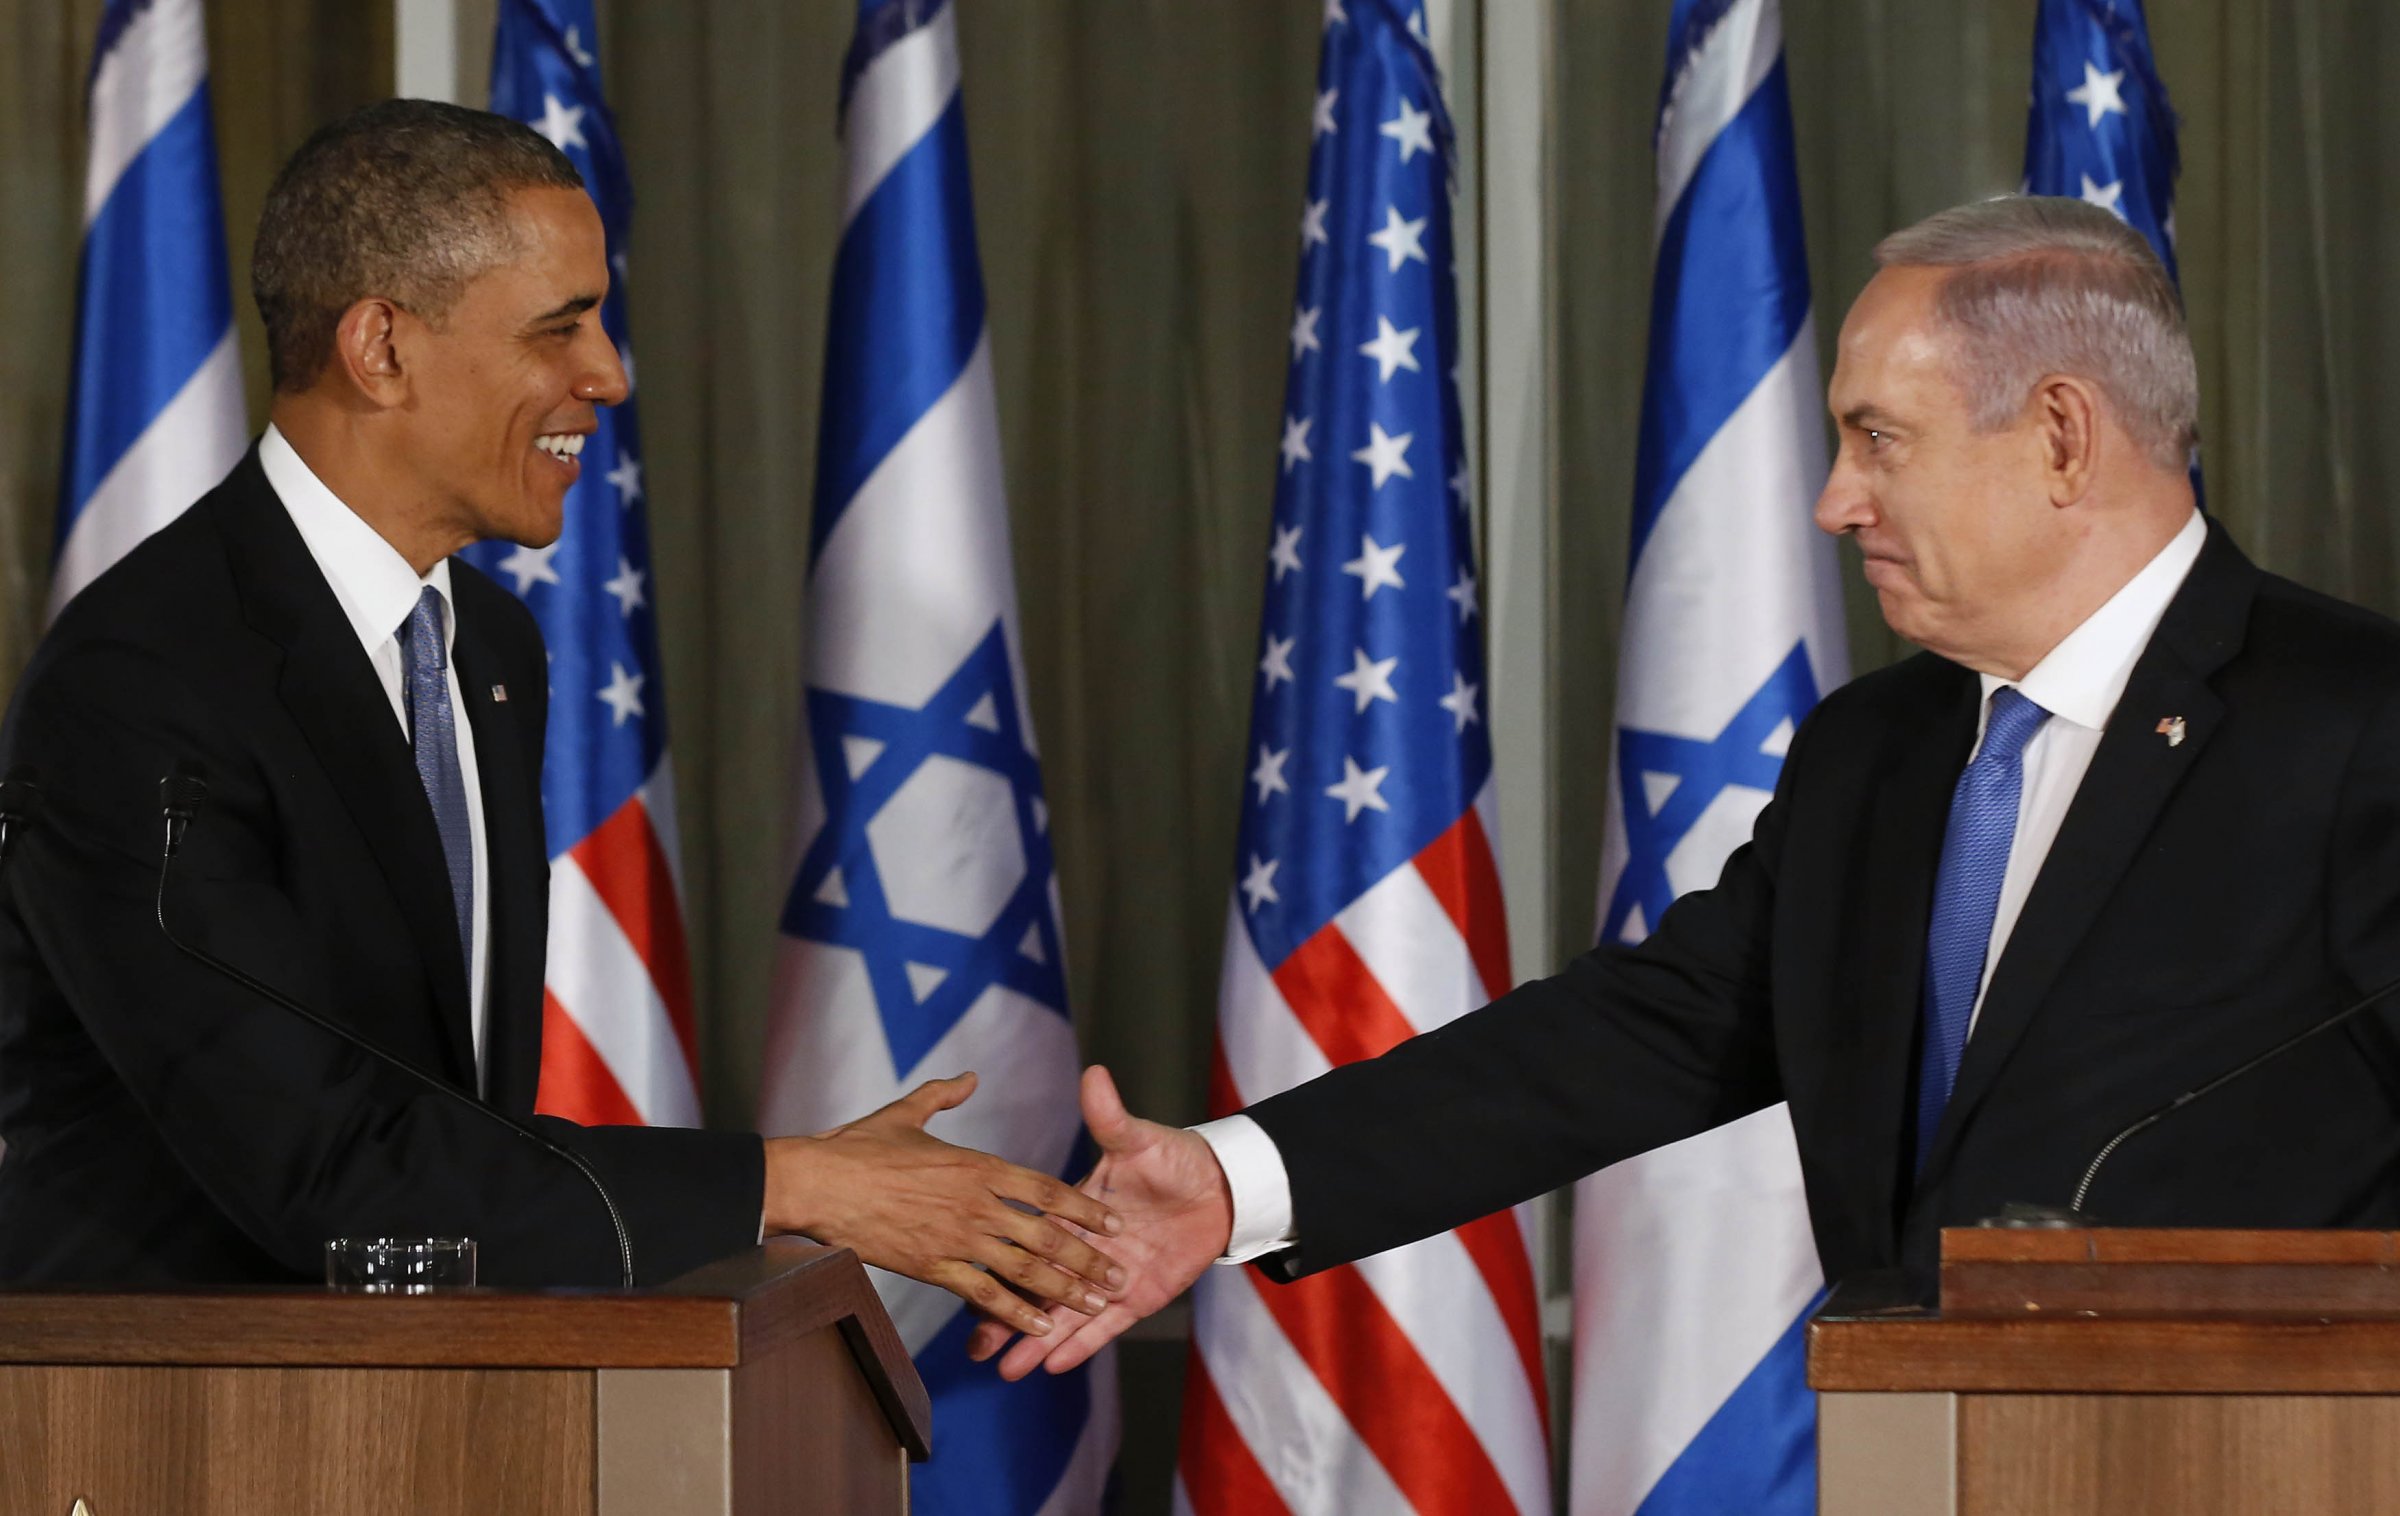 Obama Strikes the Right Balance in Israel ADL